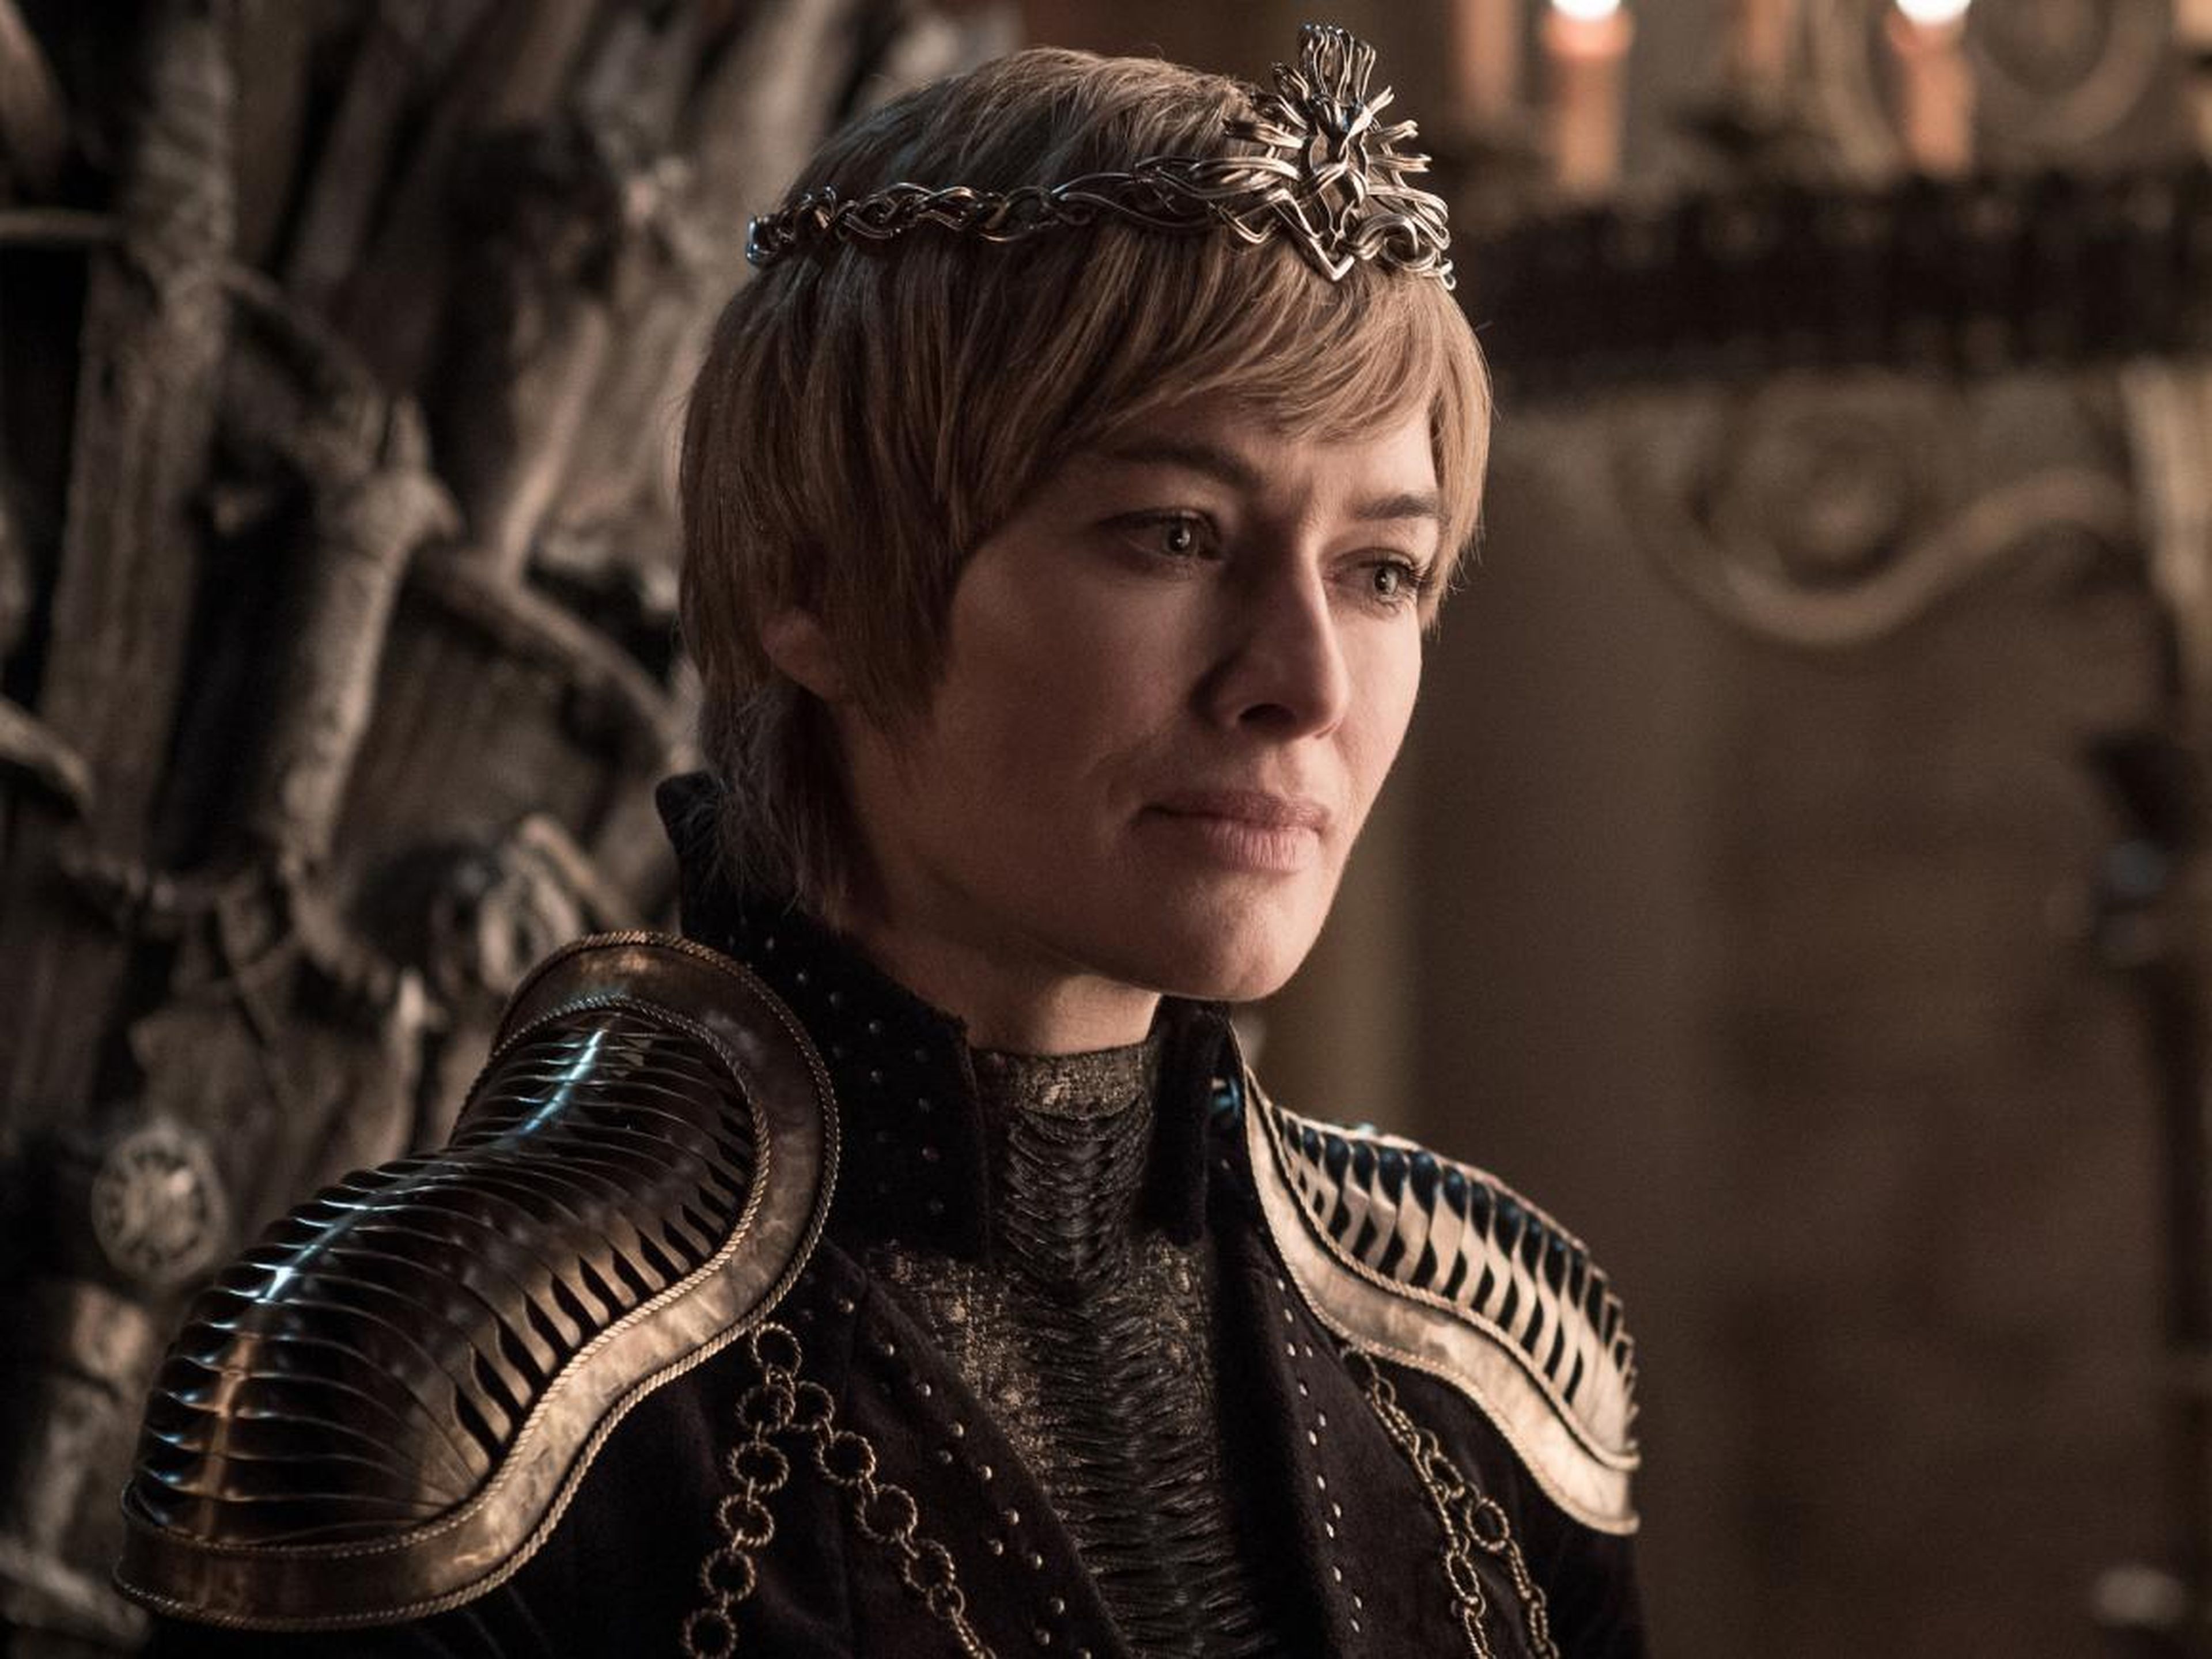 Speaking of, is Cersei going to have a child?